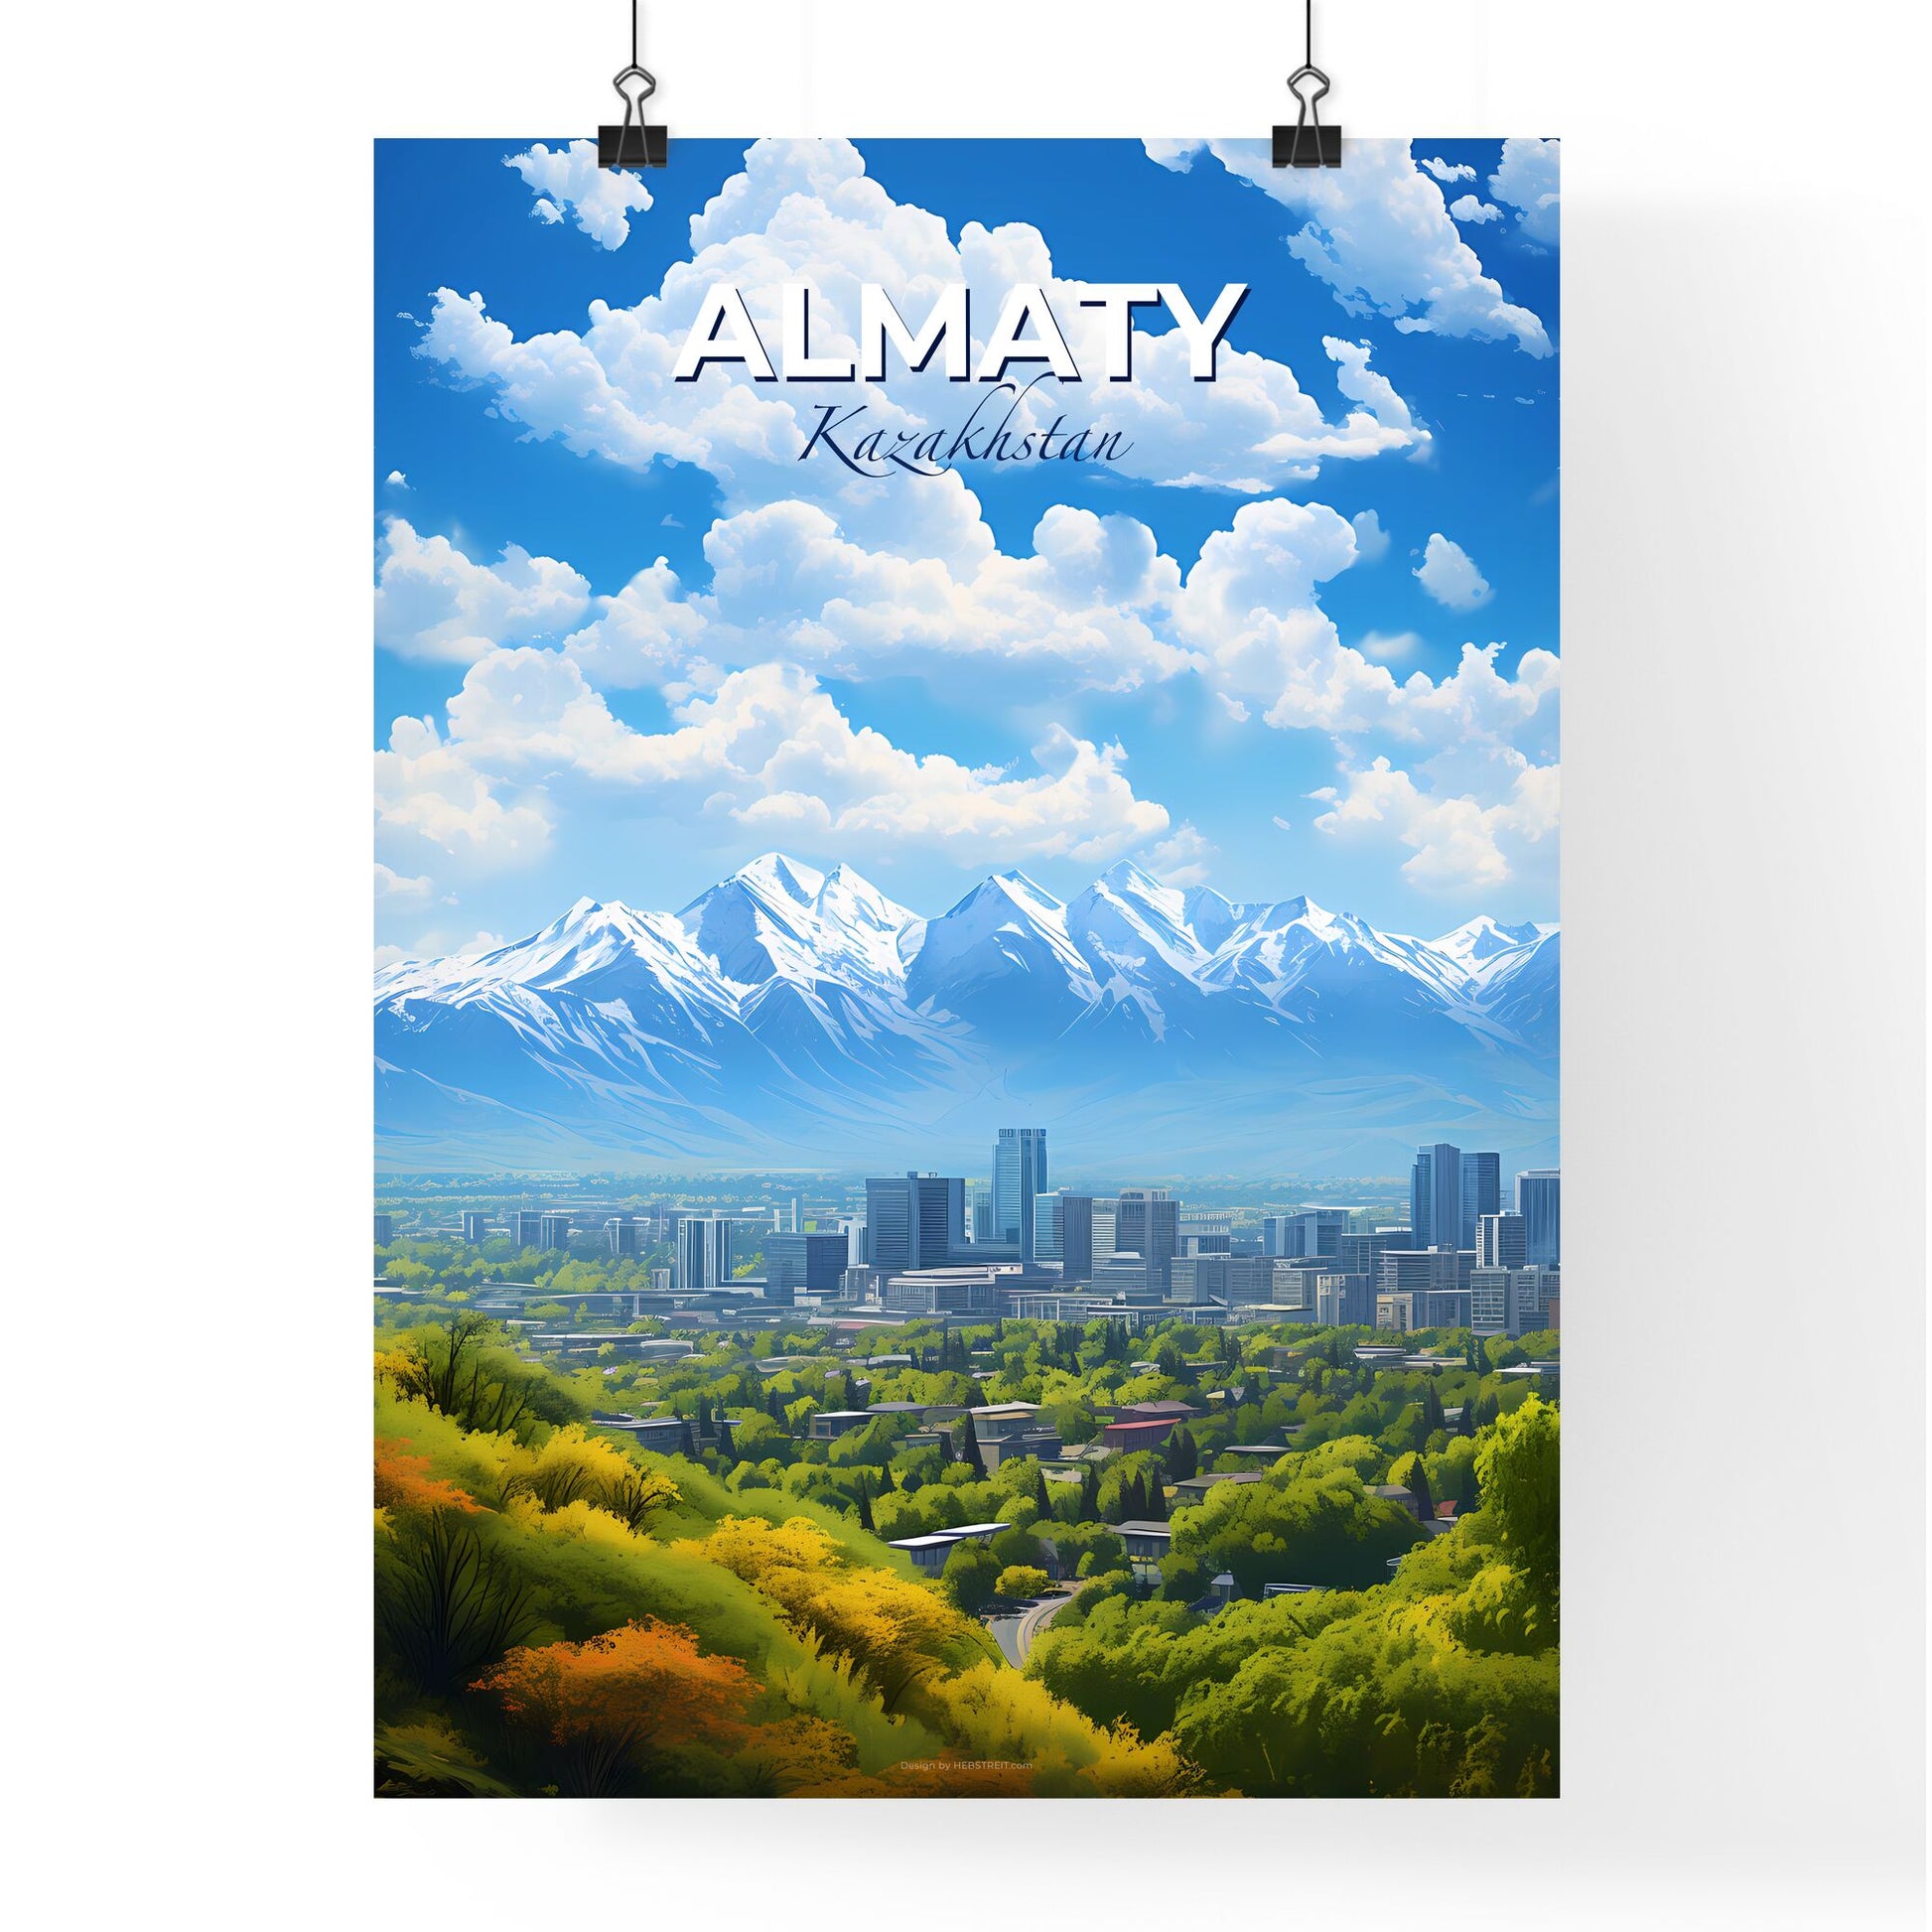 Almaty Kazakhstan Skyline - A City With Trees And Mountains In The Background - Customizable Travel Gift Default Title